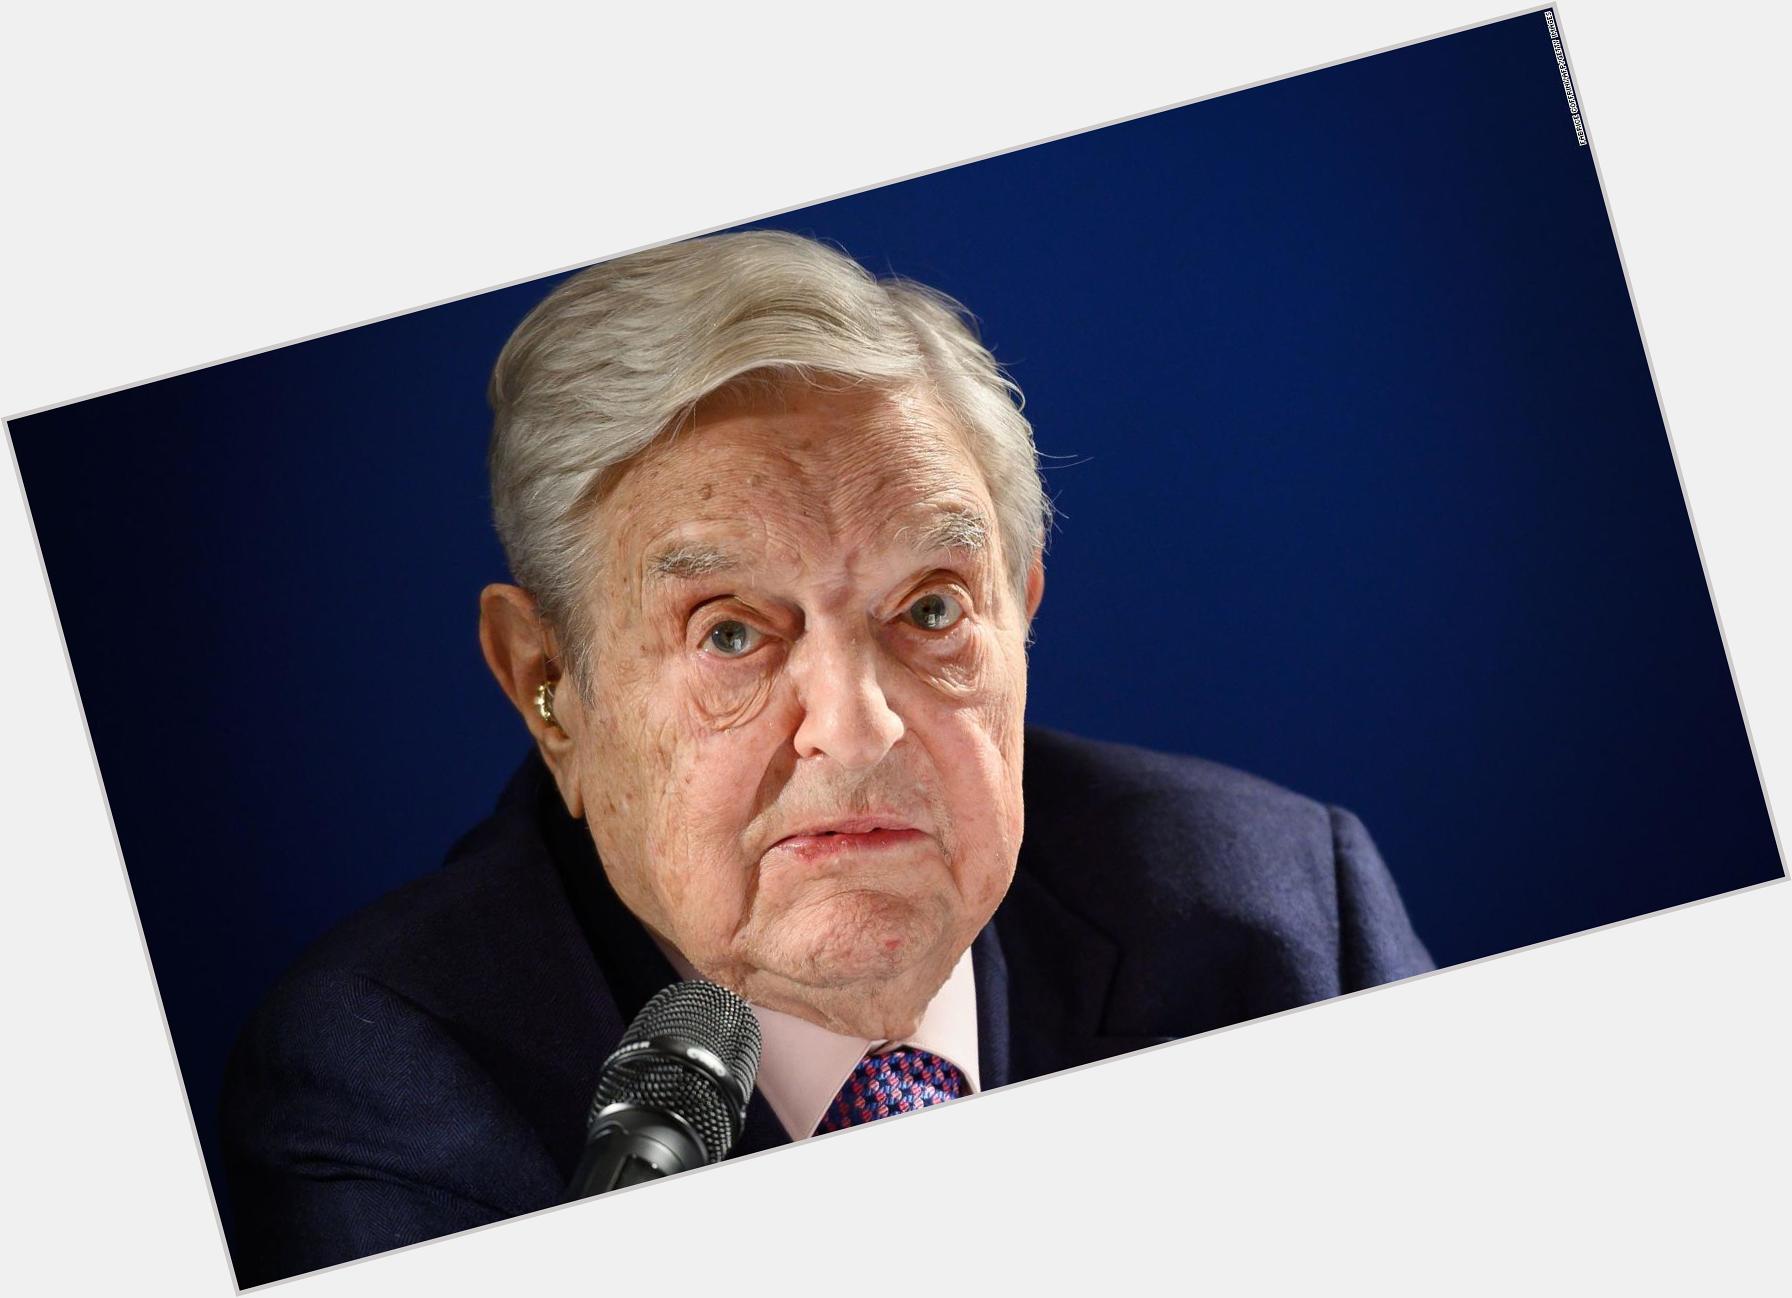 Http://fanpagepress.net/m/G/George Soros Exclusive Hot Pic 3